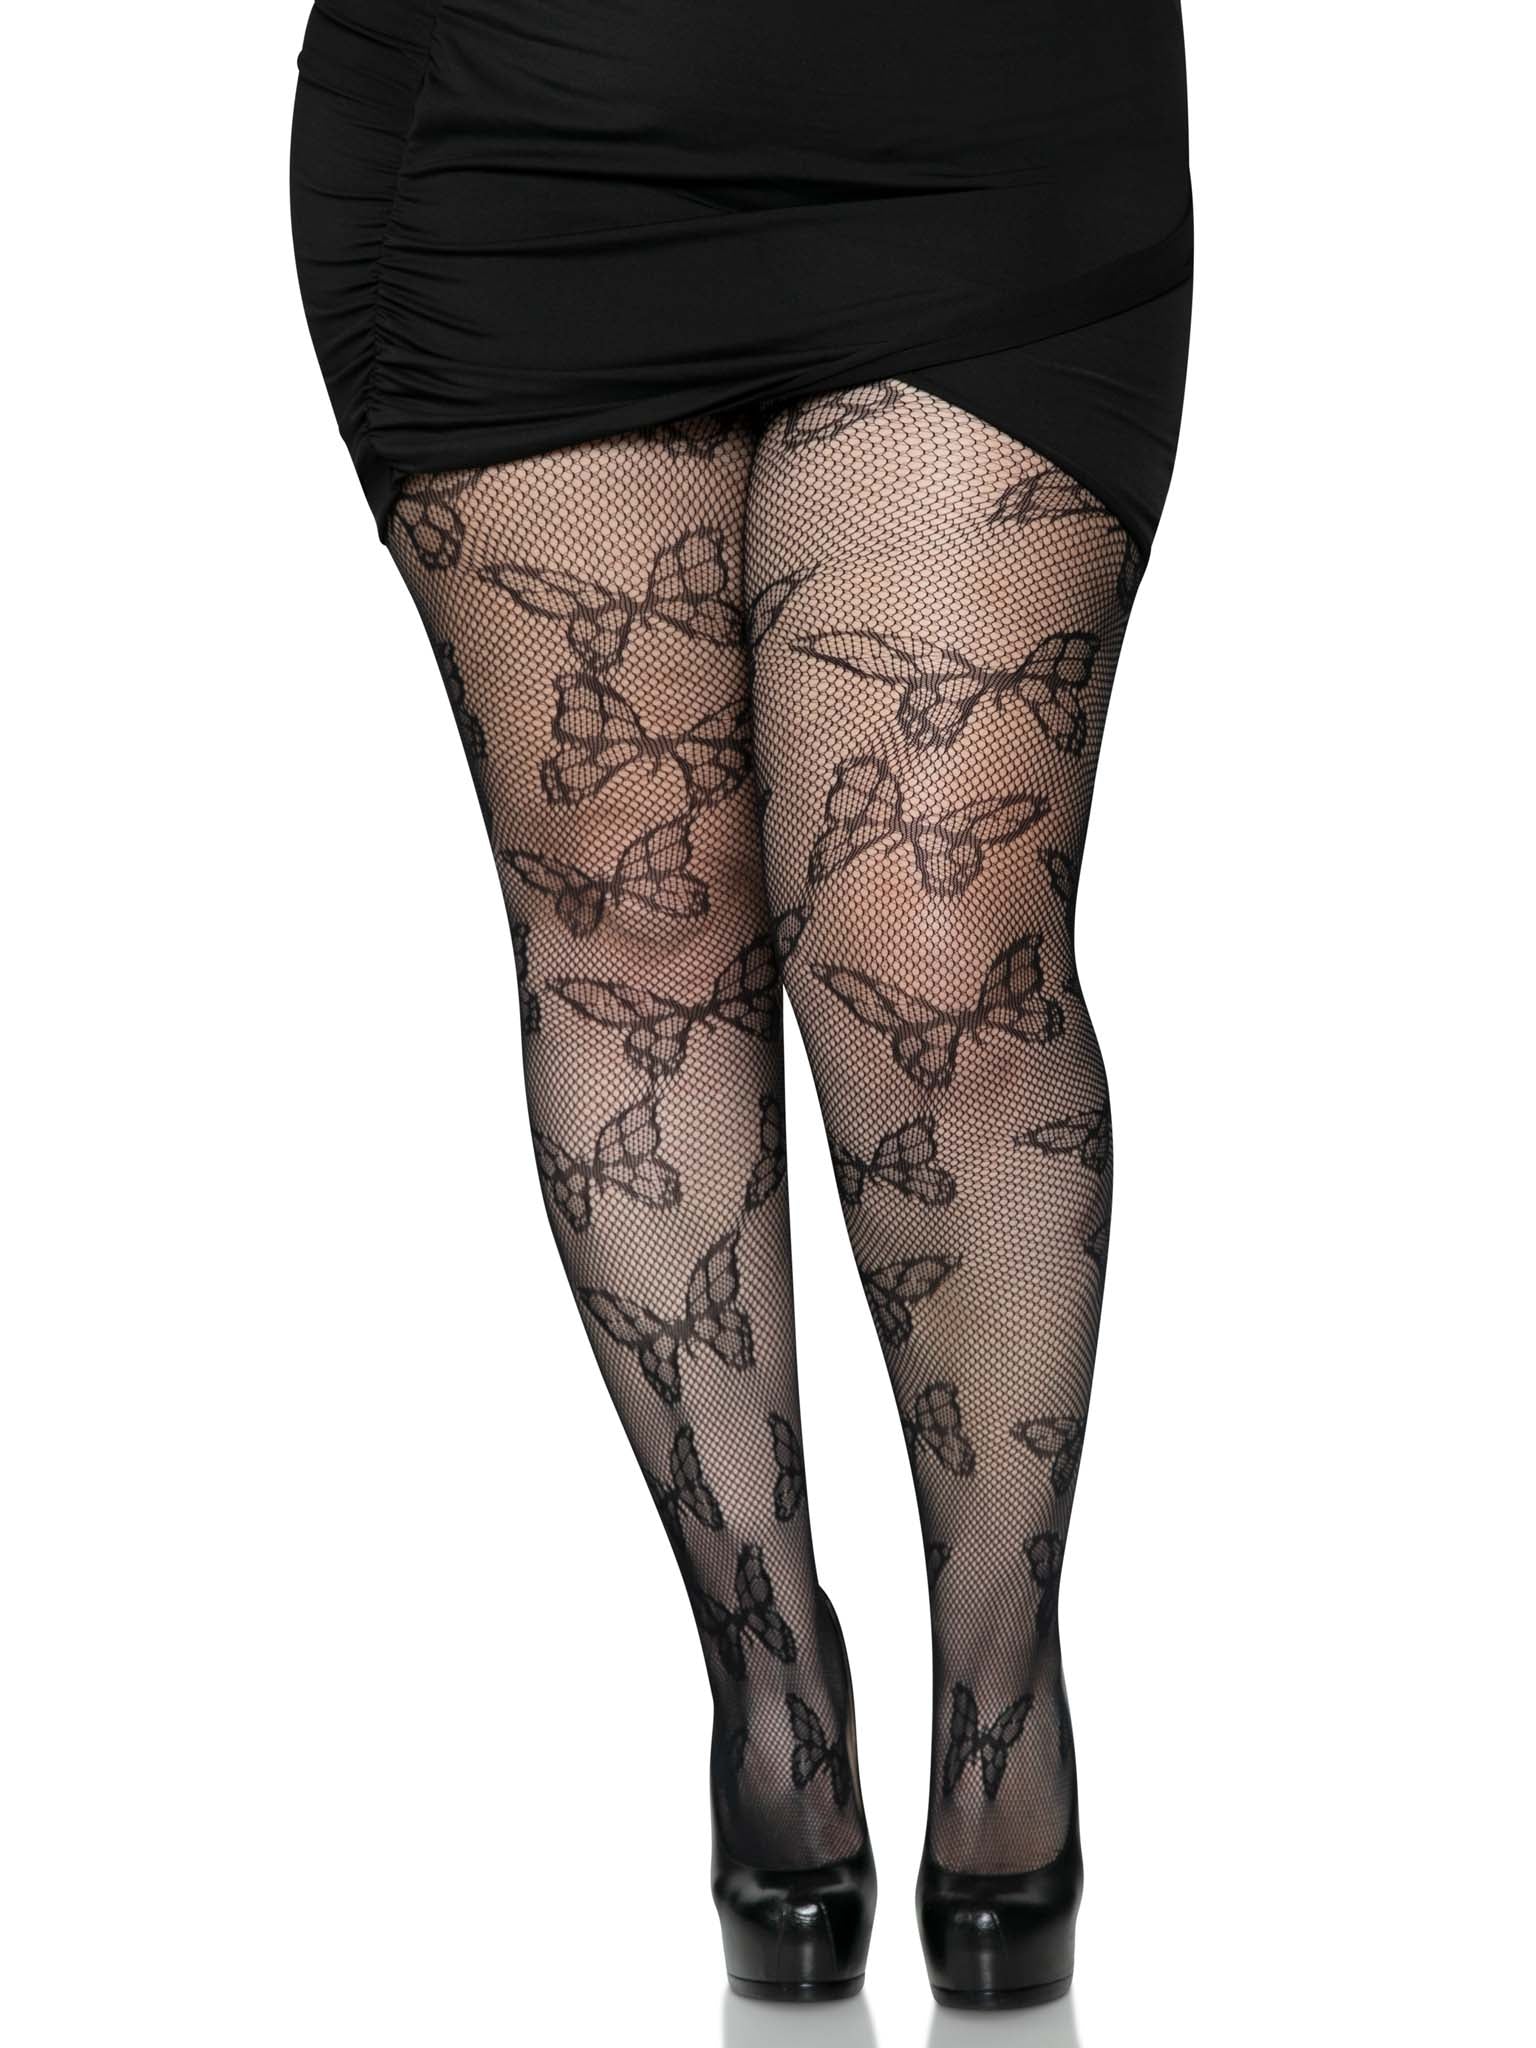 Free People Butterfly Lace Tights, Black, One Size, RRP £24 